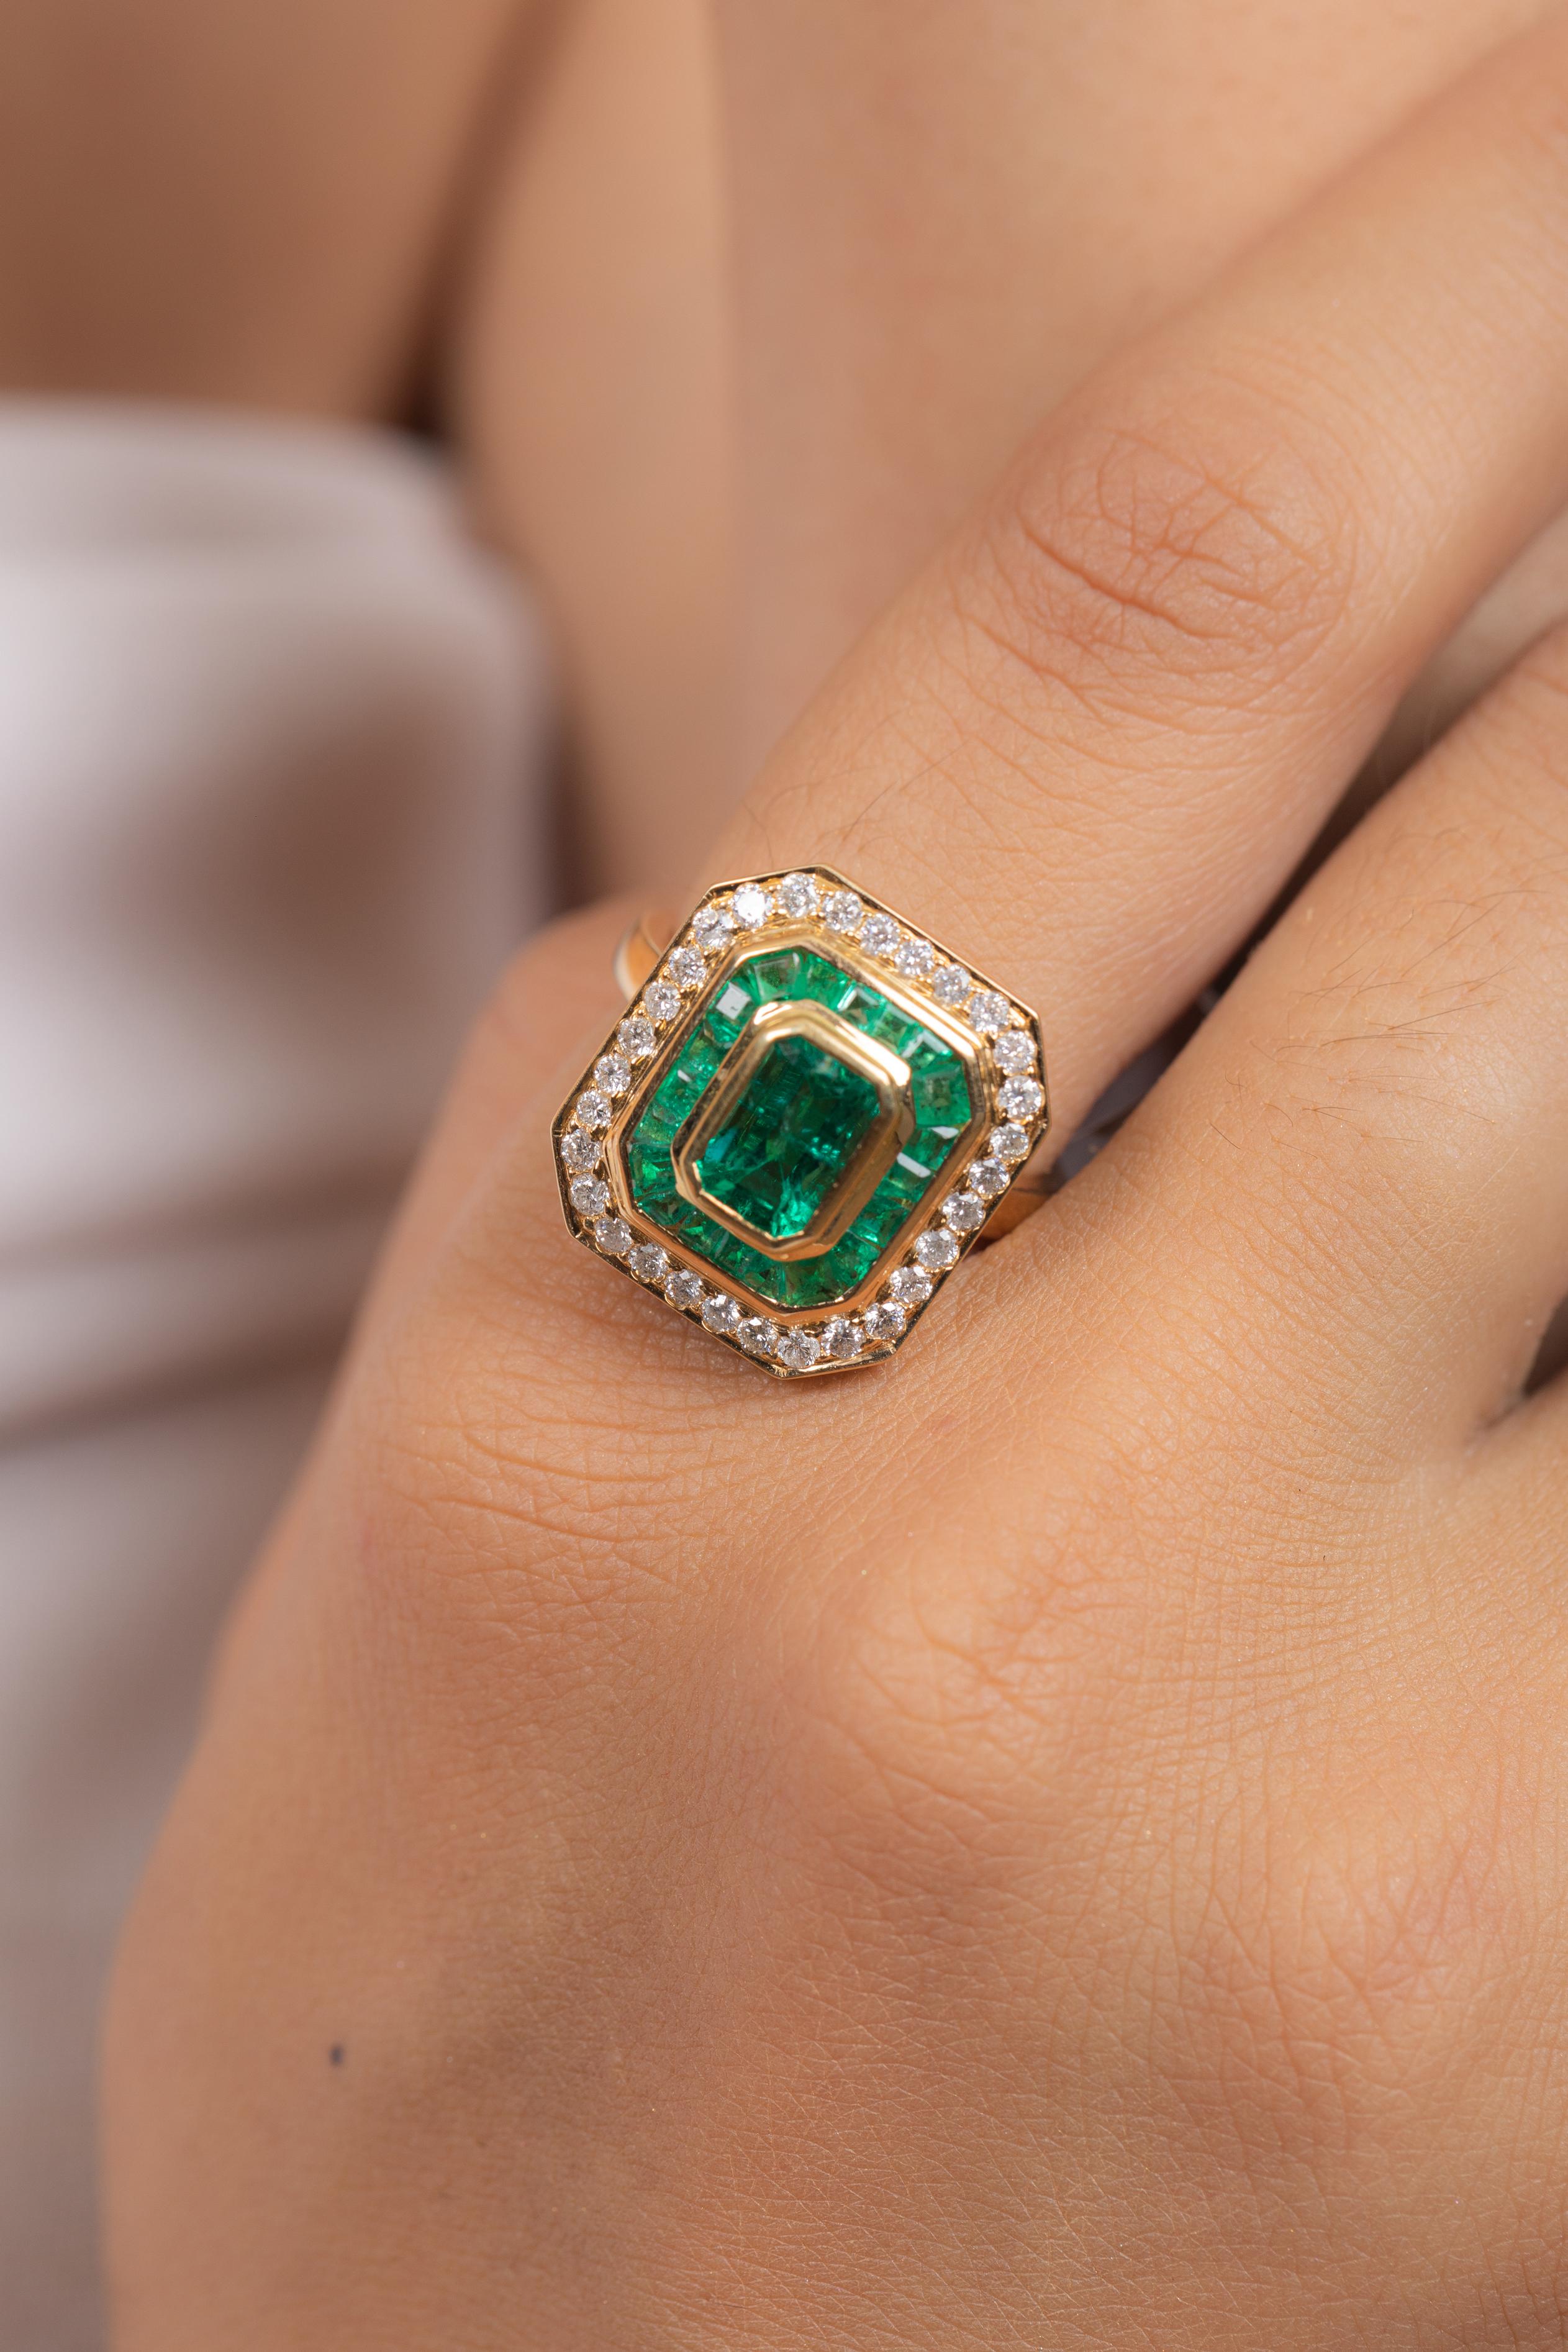 For Sale:  3.03 CTW Diamond and Emerald Cocktail Ring in 18 Karat Solid Yellow Gold 2